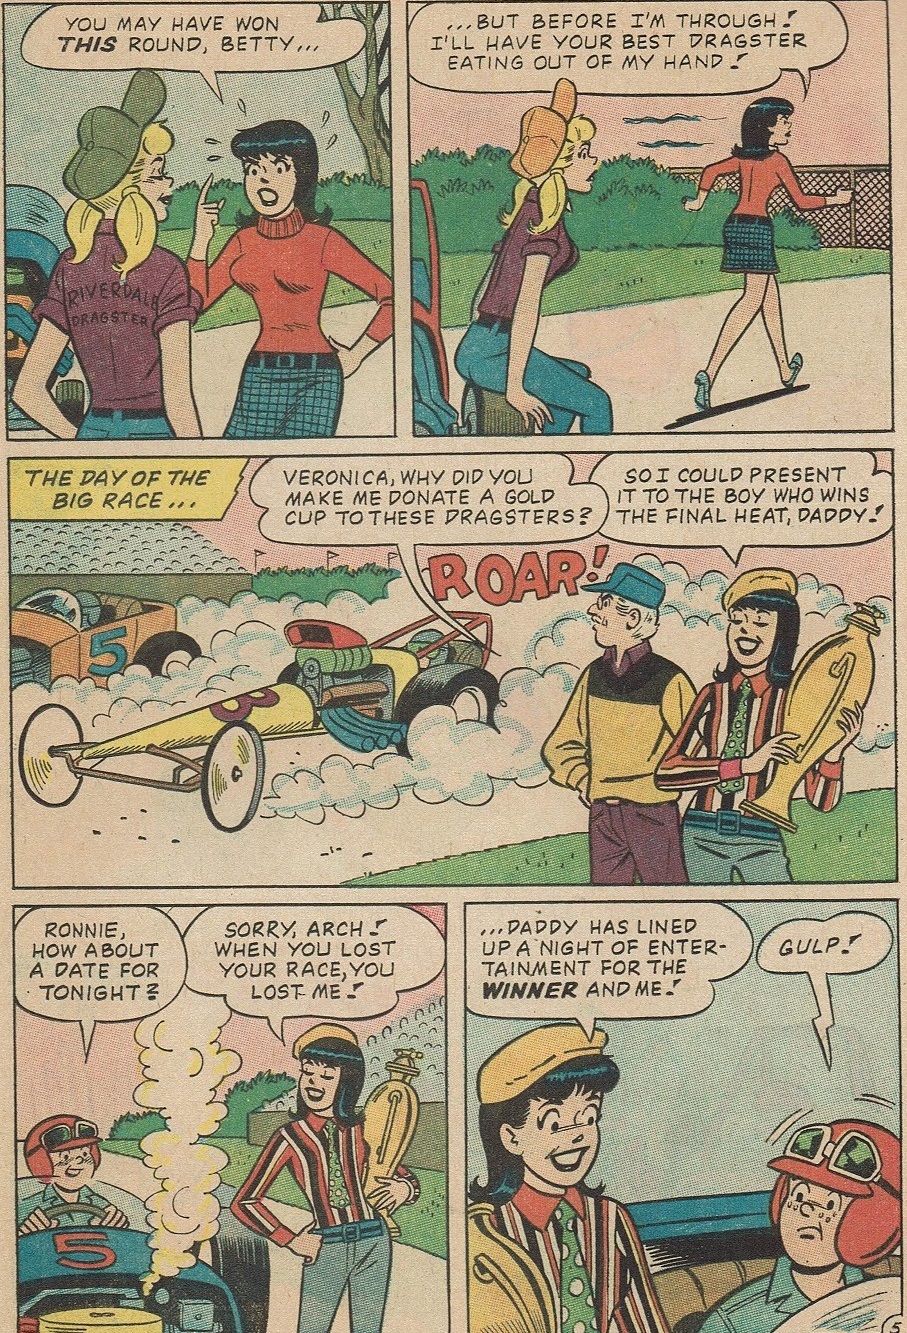 Archie doesn't win the race